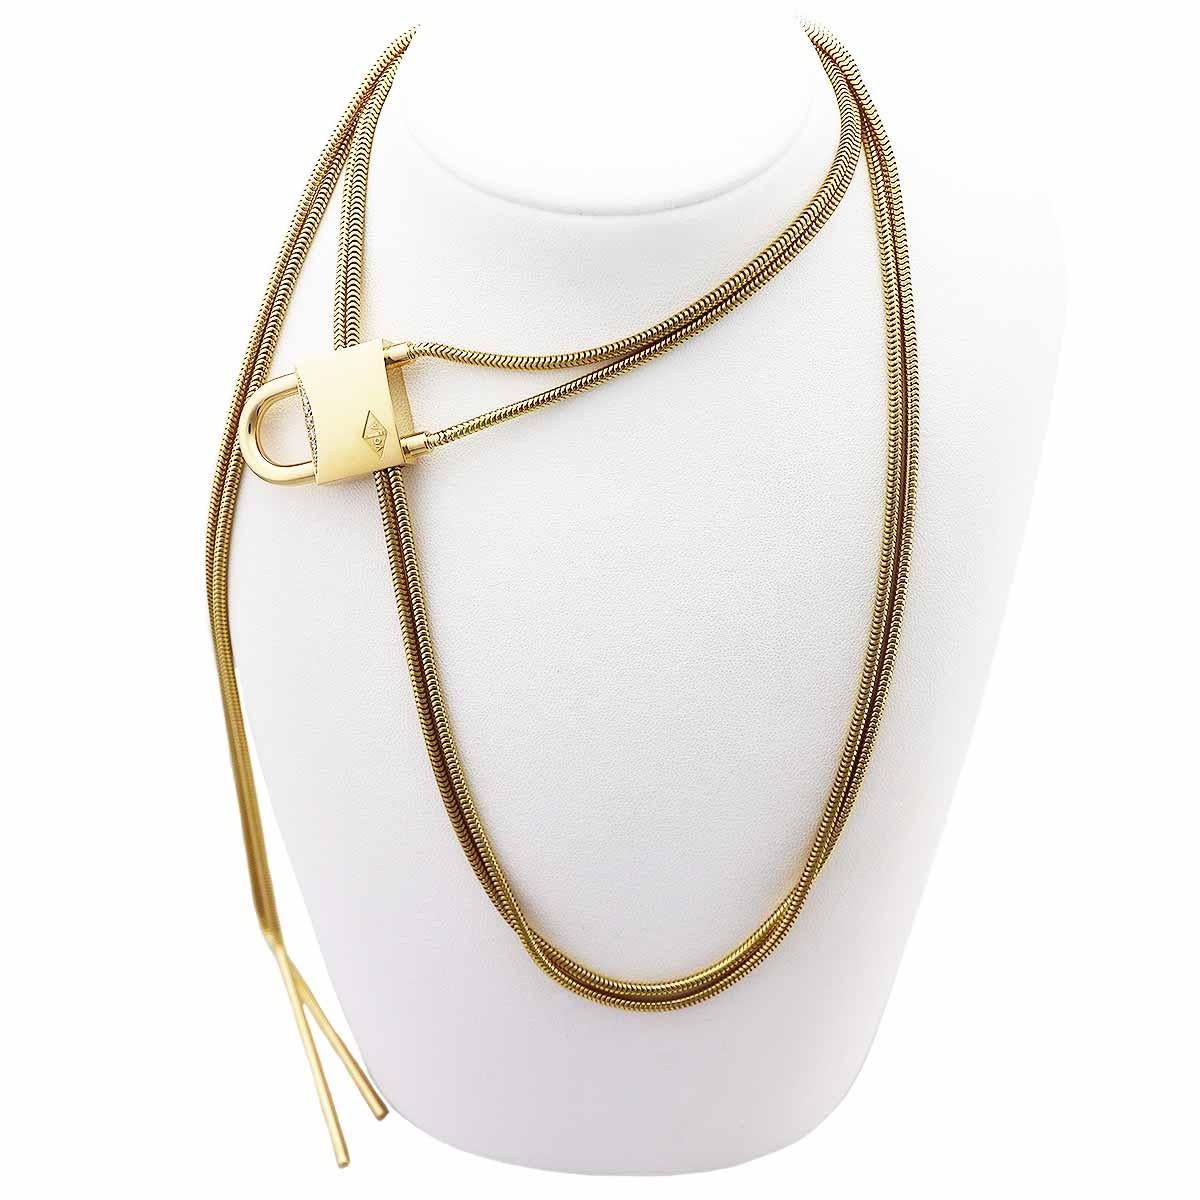 ■Item Number: 23591001
■Brand: Van Cleef & Arpels
■Product Name: Cadena Gold Long Necklace
■Product Code/Model Number: -
■Material: 9P Diamonds, 750 K18 YG (Yellow Gold)
■Weight: Approximately 93.3g 
■Neck Circumference: Free (adjustable)
■Top: